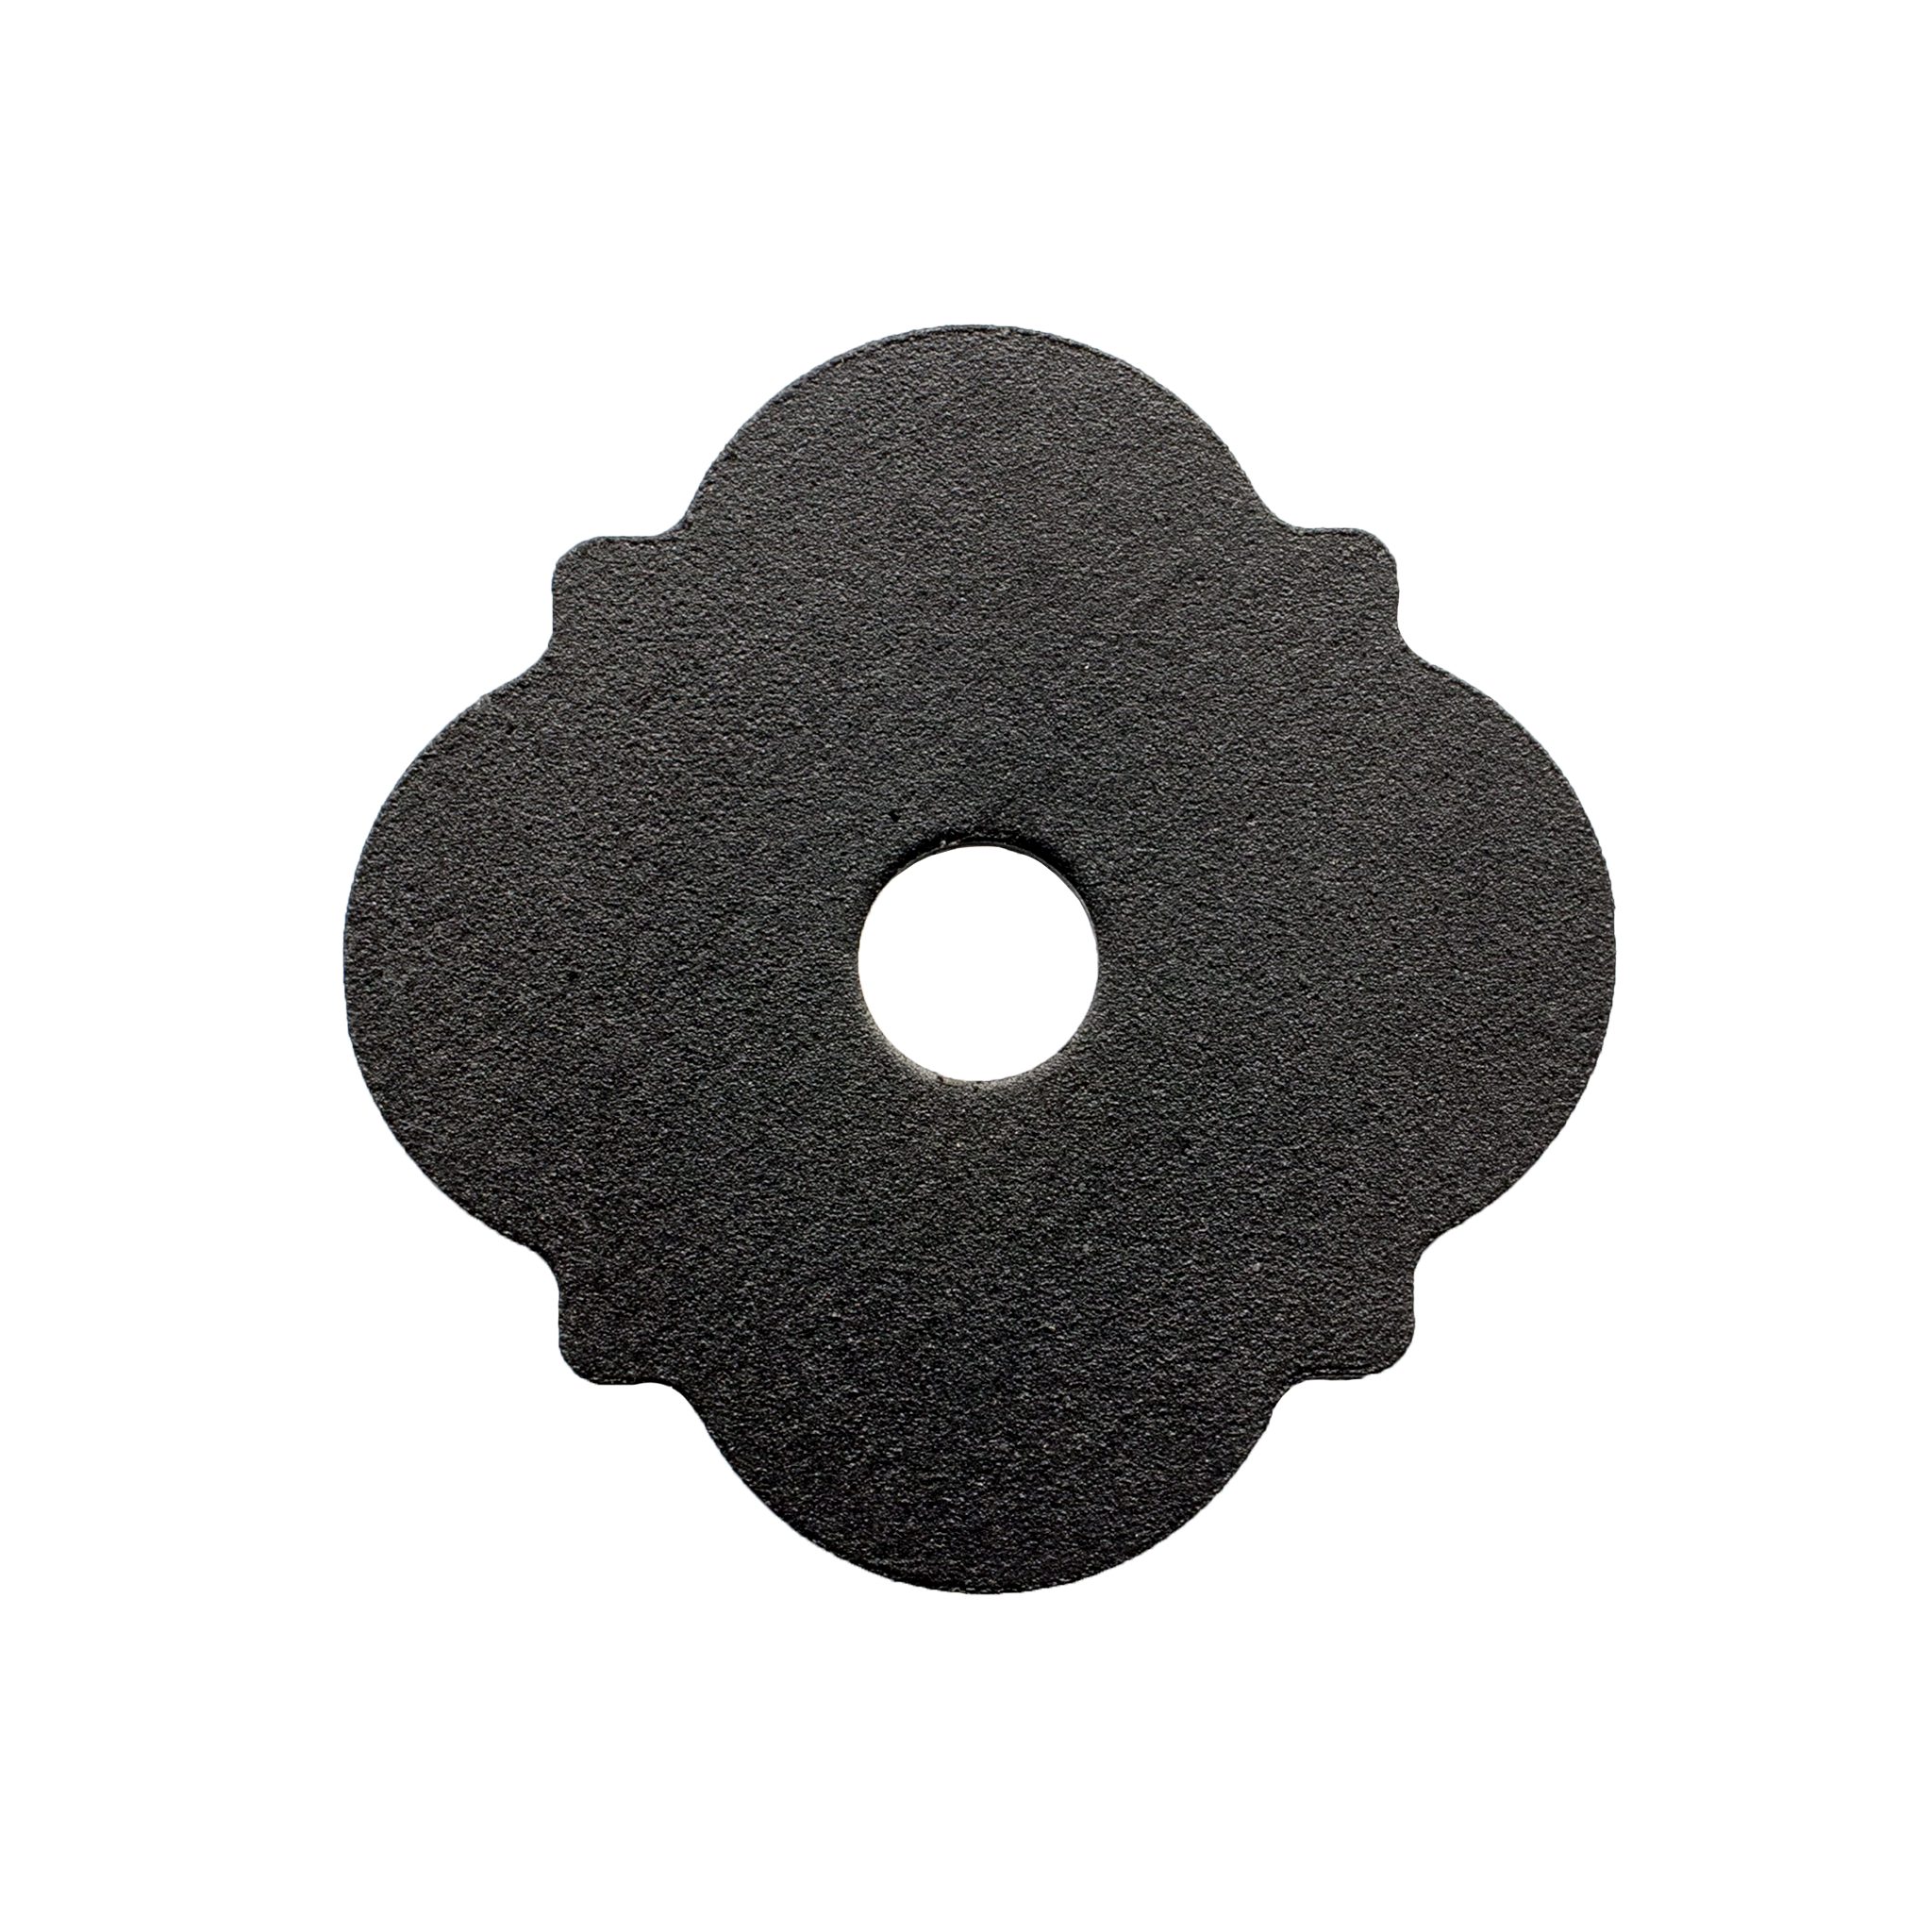 Outdoor Accents® Mission Collection® ZMAX®, Black Powder-Coated Decorative Washer (Pack of 2880)